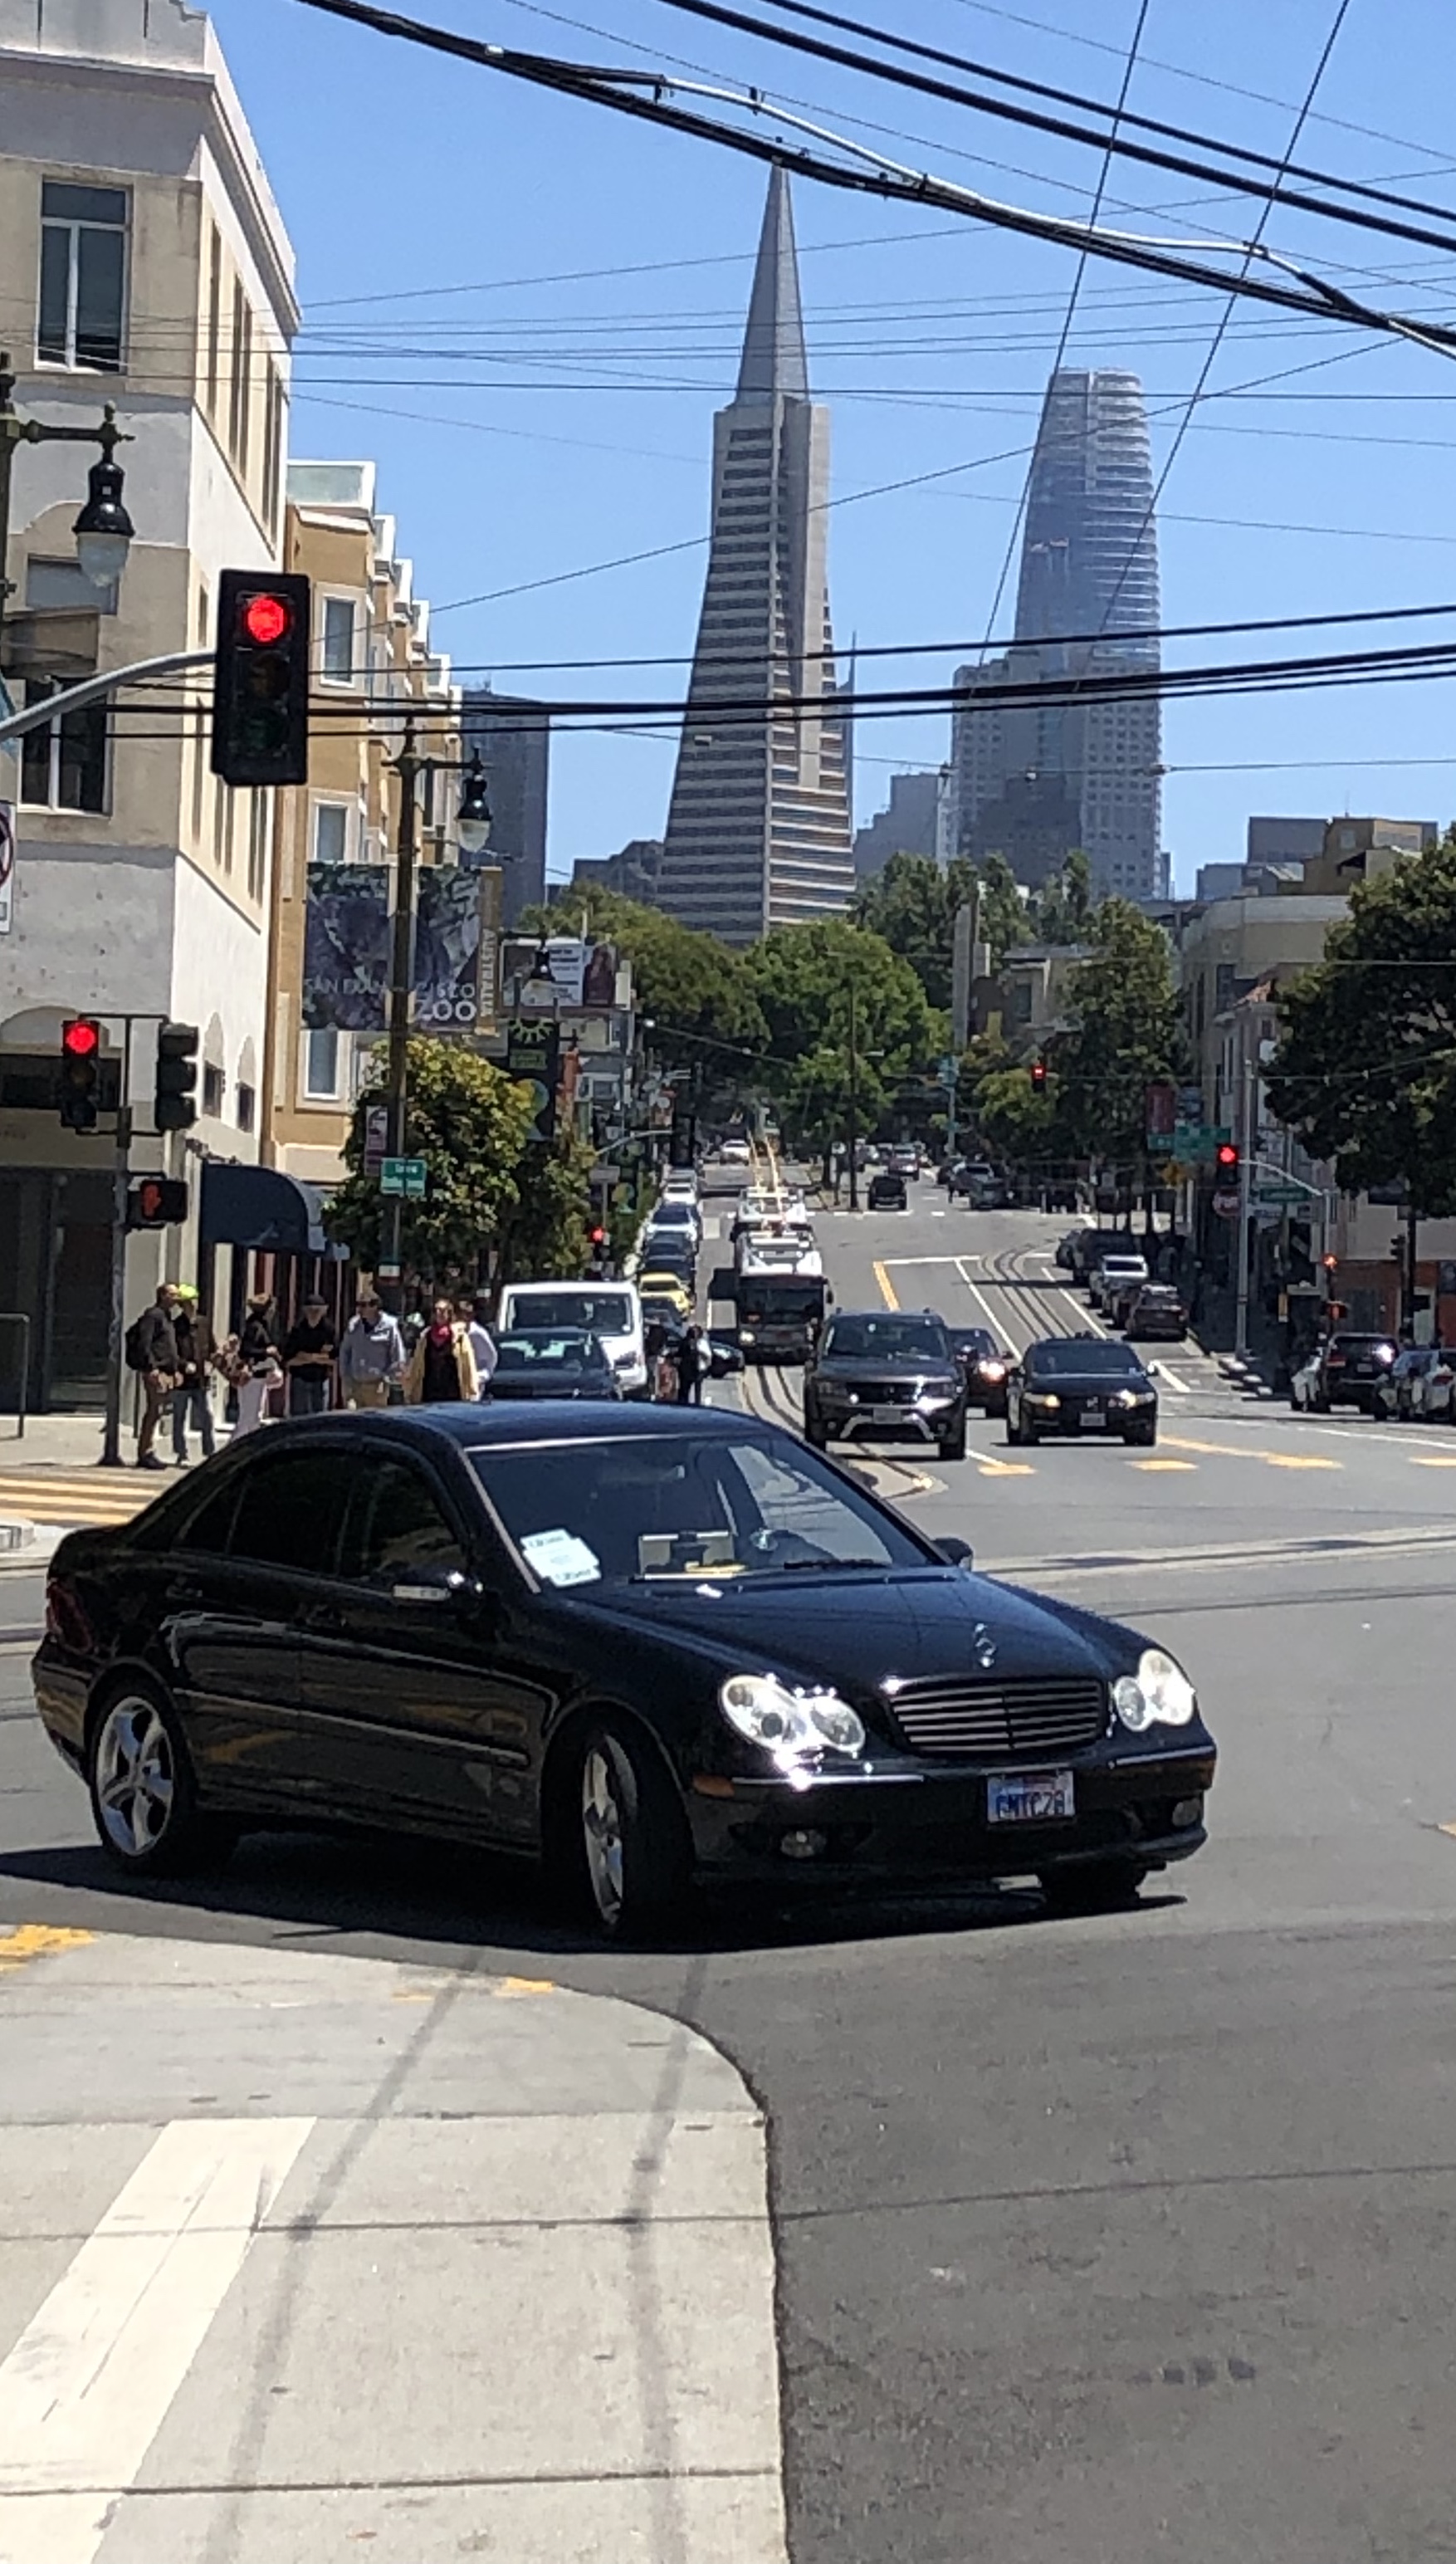 New skyline - it used to be just the Transamerica Pyramid.